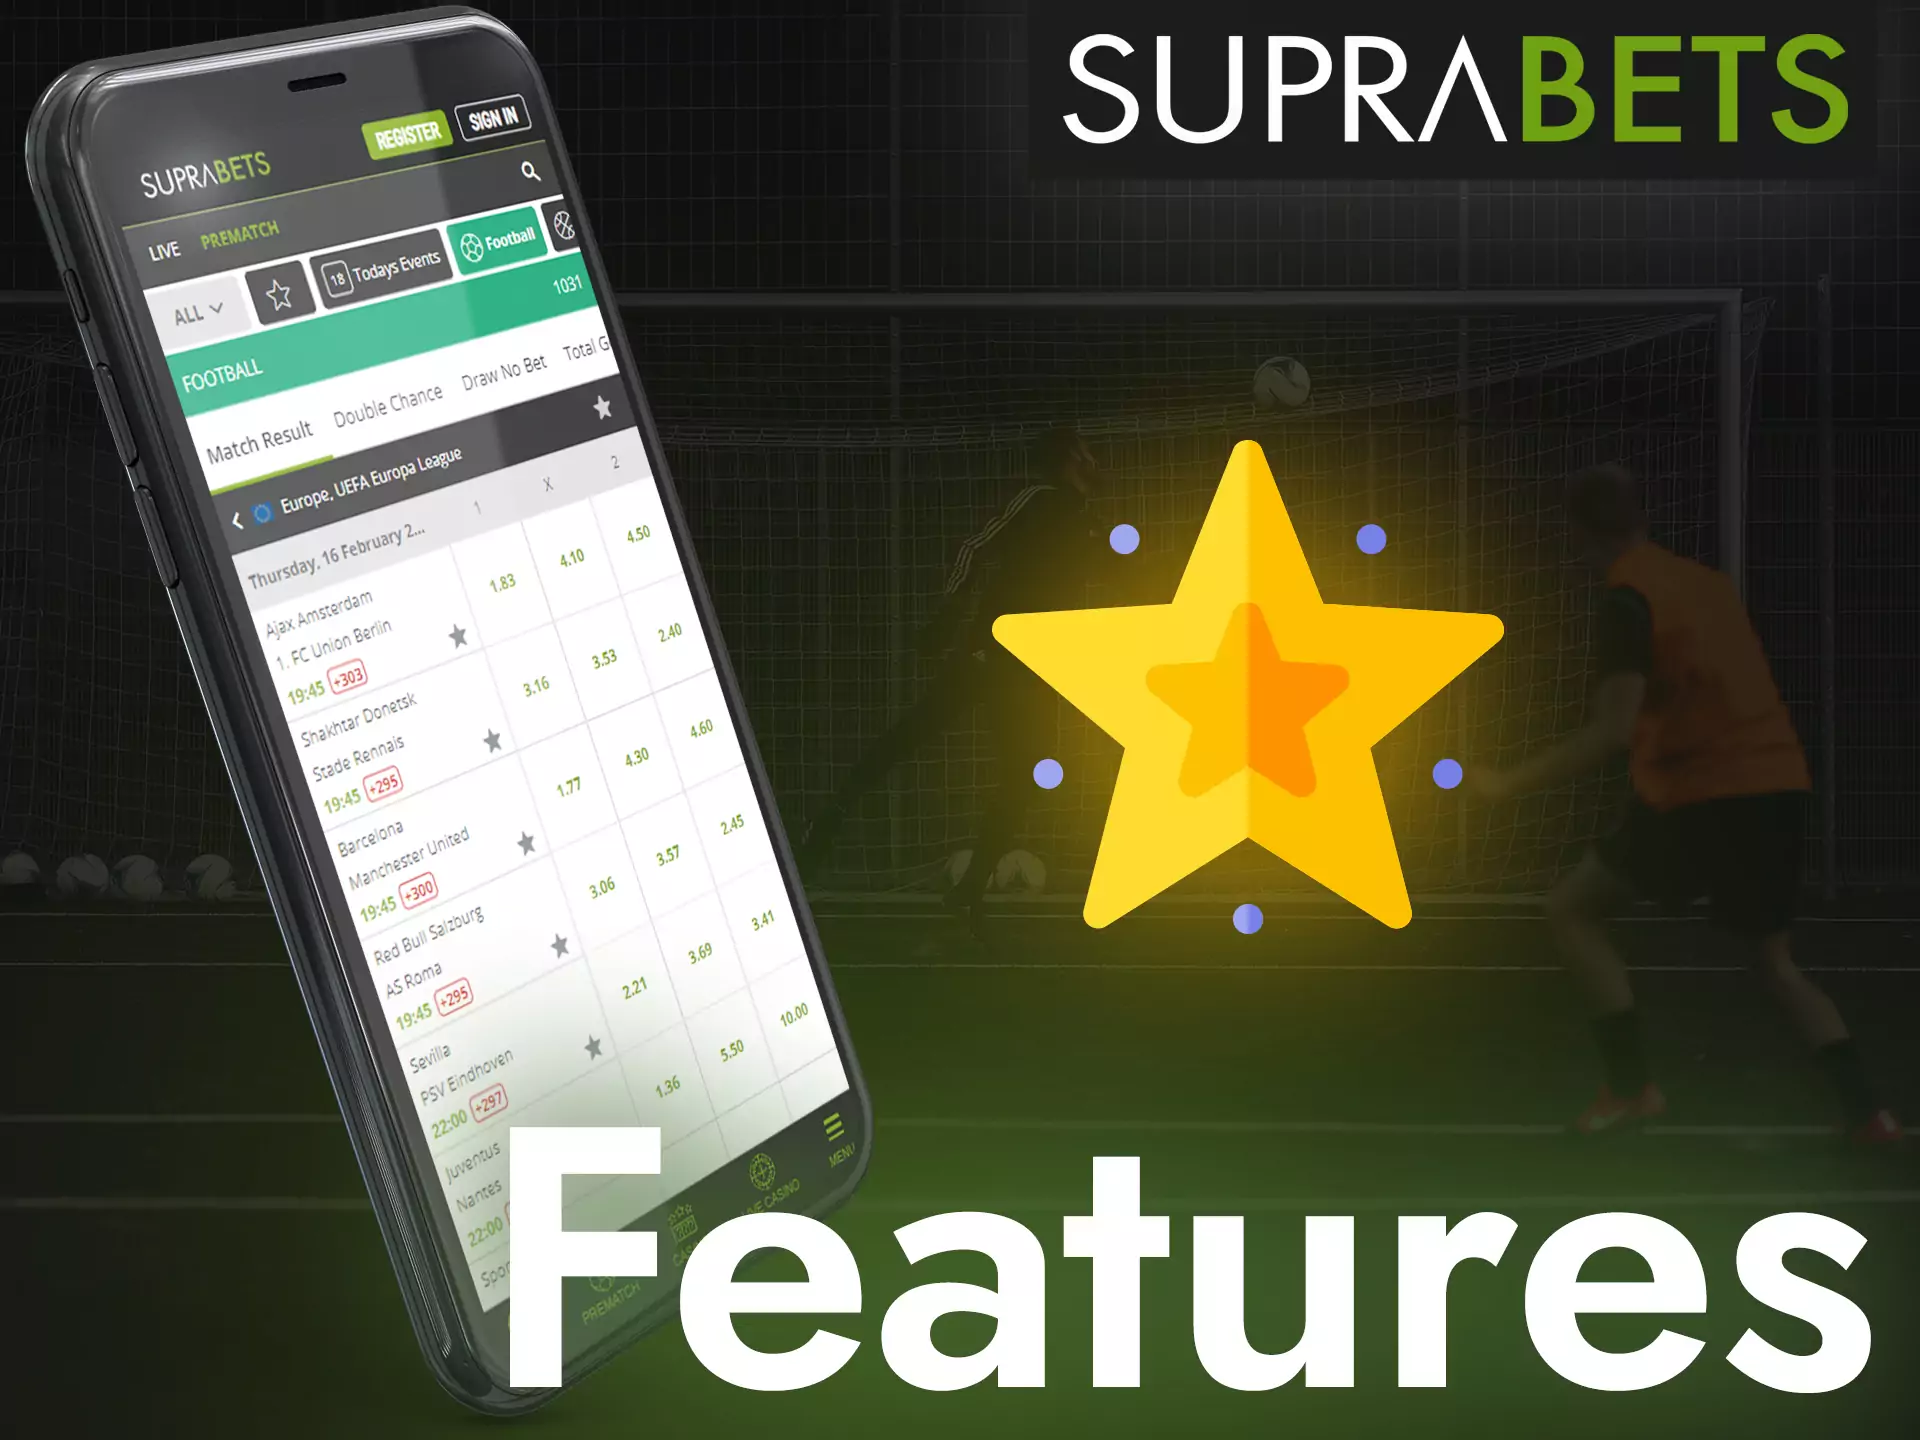 Suprabets offers its players many features that will make the game nice.